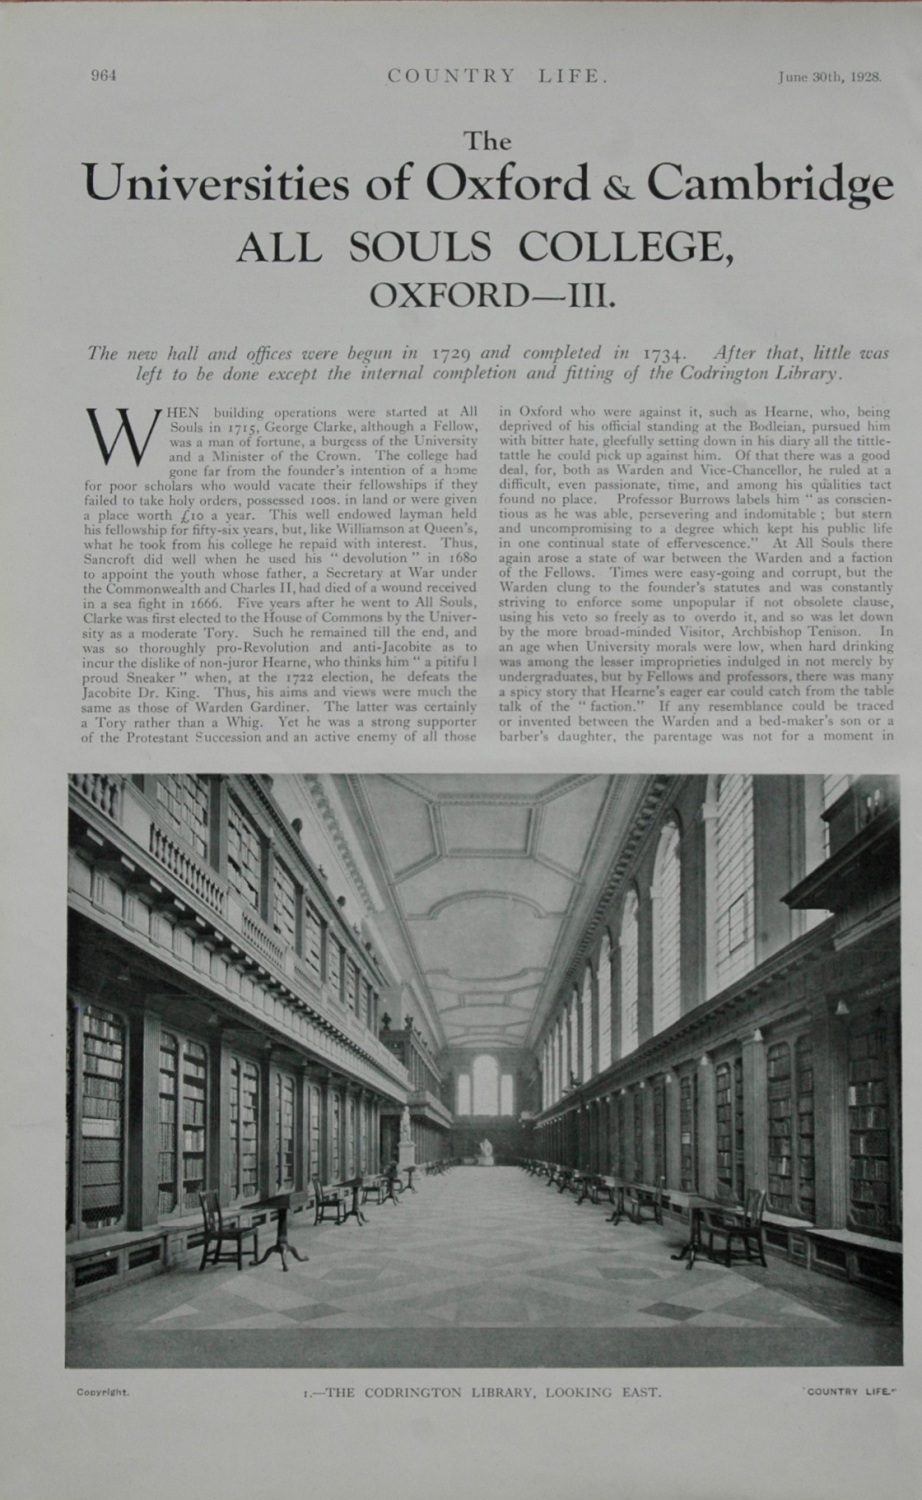 The Colleges of Oxford & Cambridge, 1928